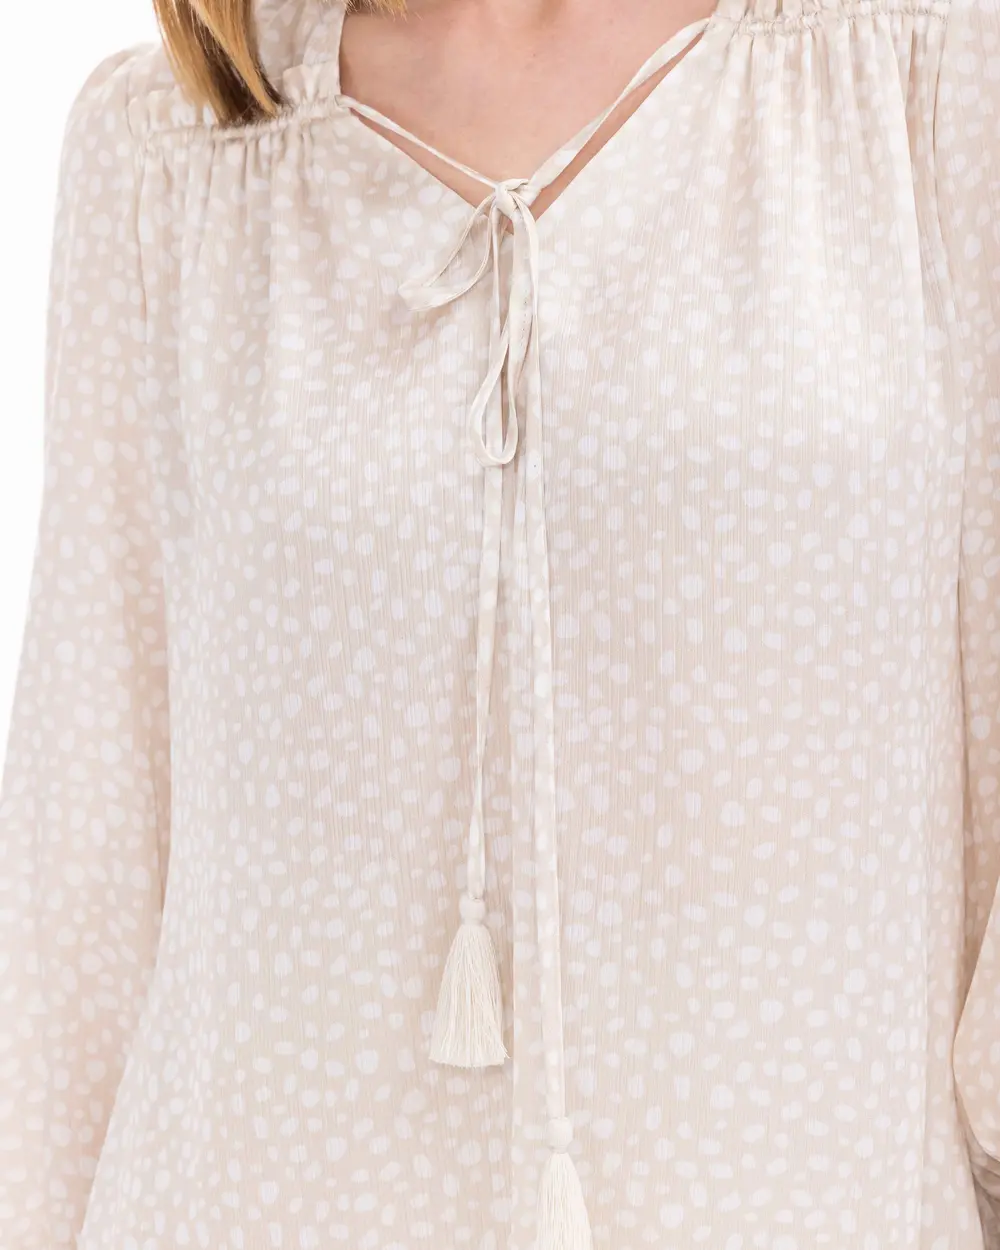 Polka Dot Patterned Blouse with Shirred Sleeves